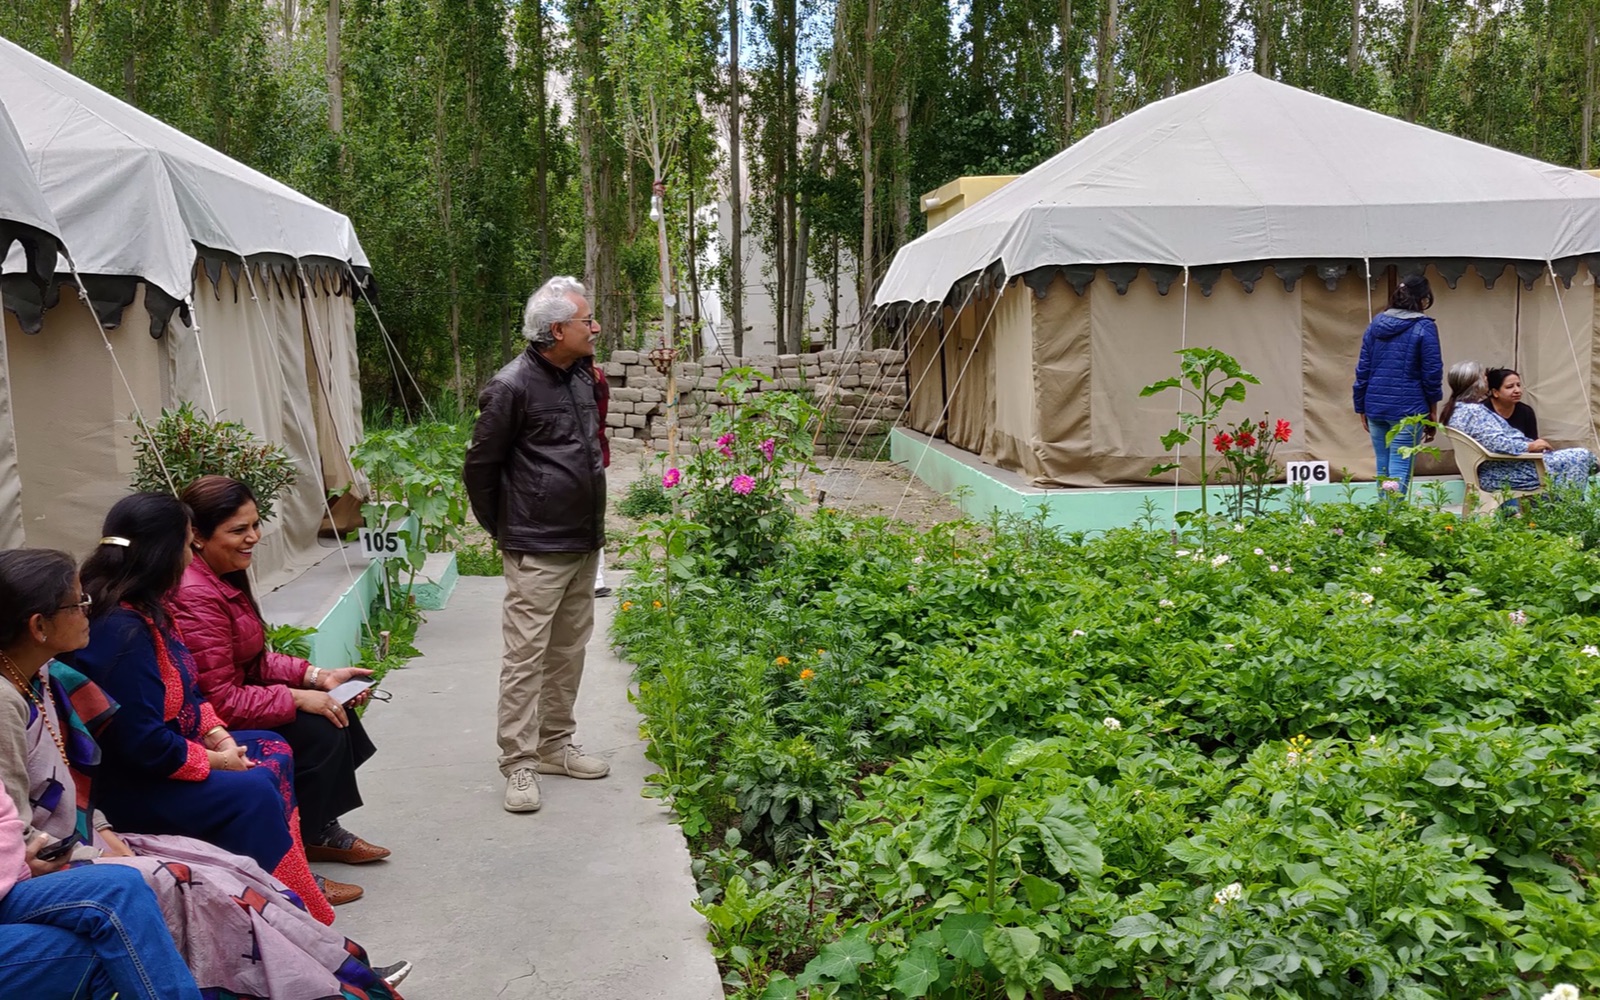 Deluxe Swiss camp stay at Nubra valley